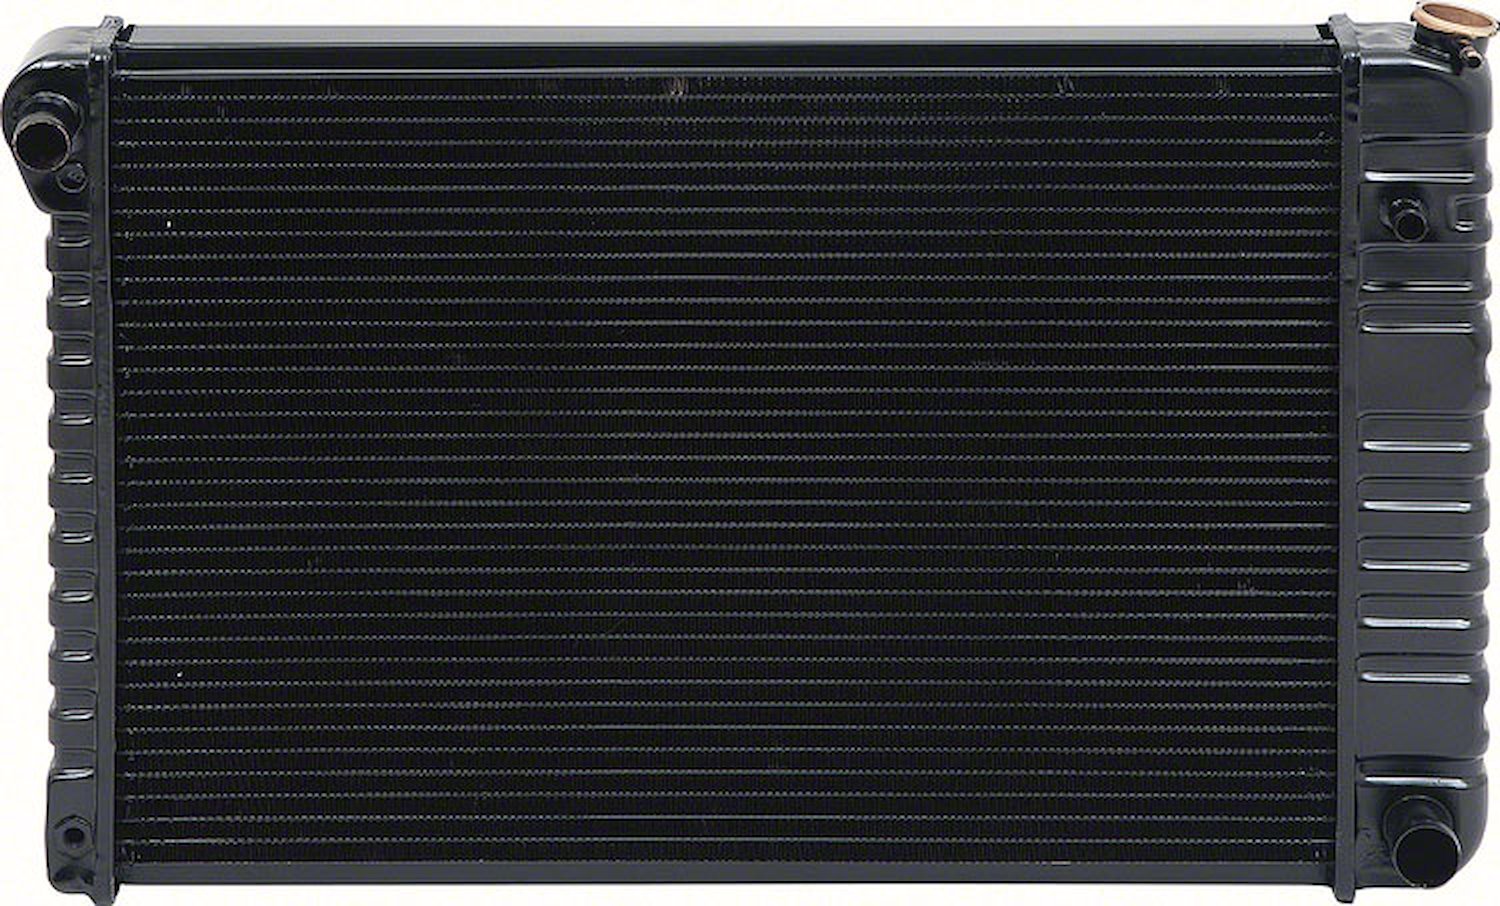 CRD1785S Radiator 1978-80 Chevrolet Truck V8 With MT 4 Row Copper/Brass (17" x 28-3/8" x 2-5/8" Core)